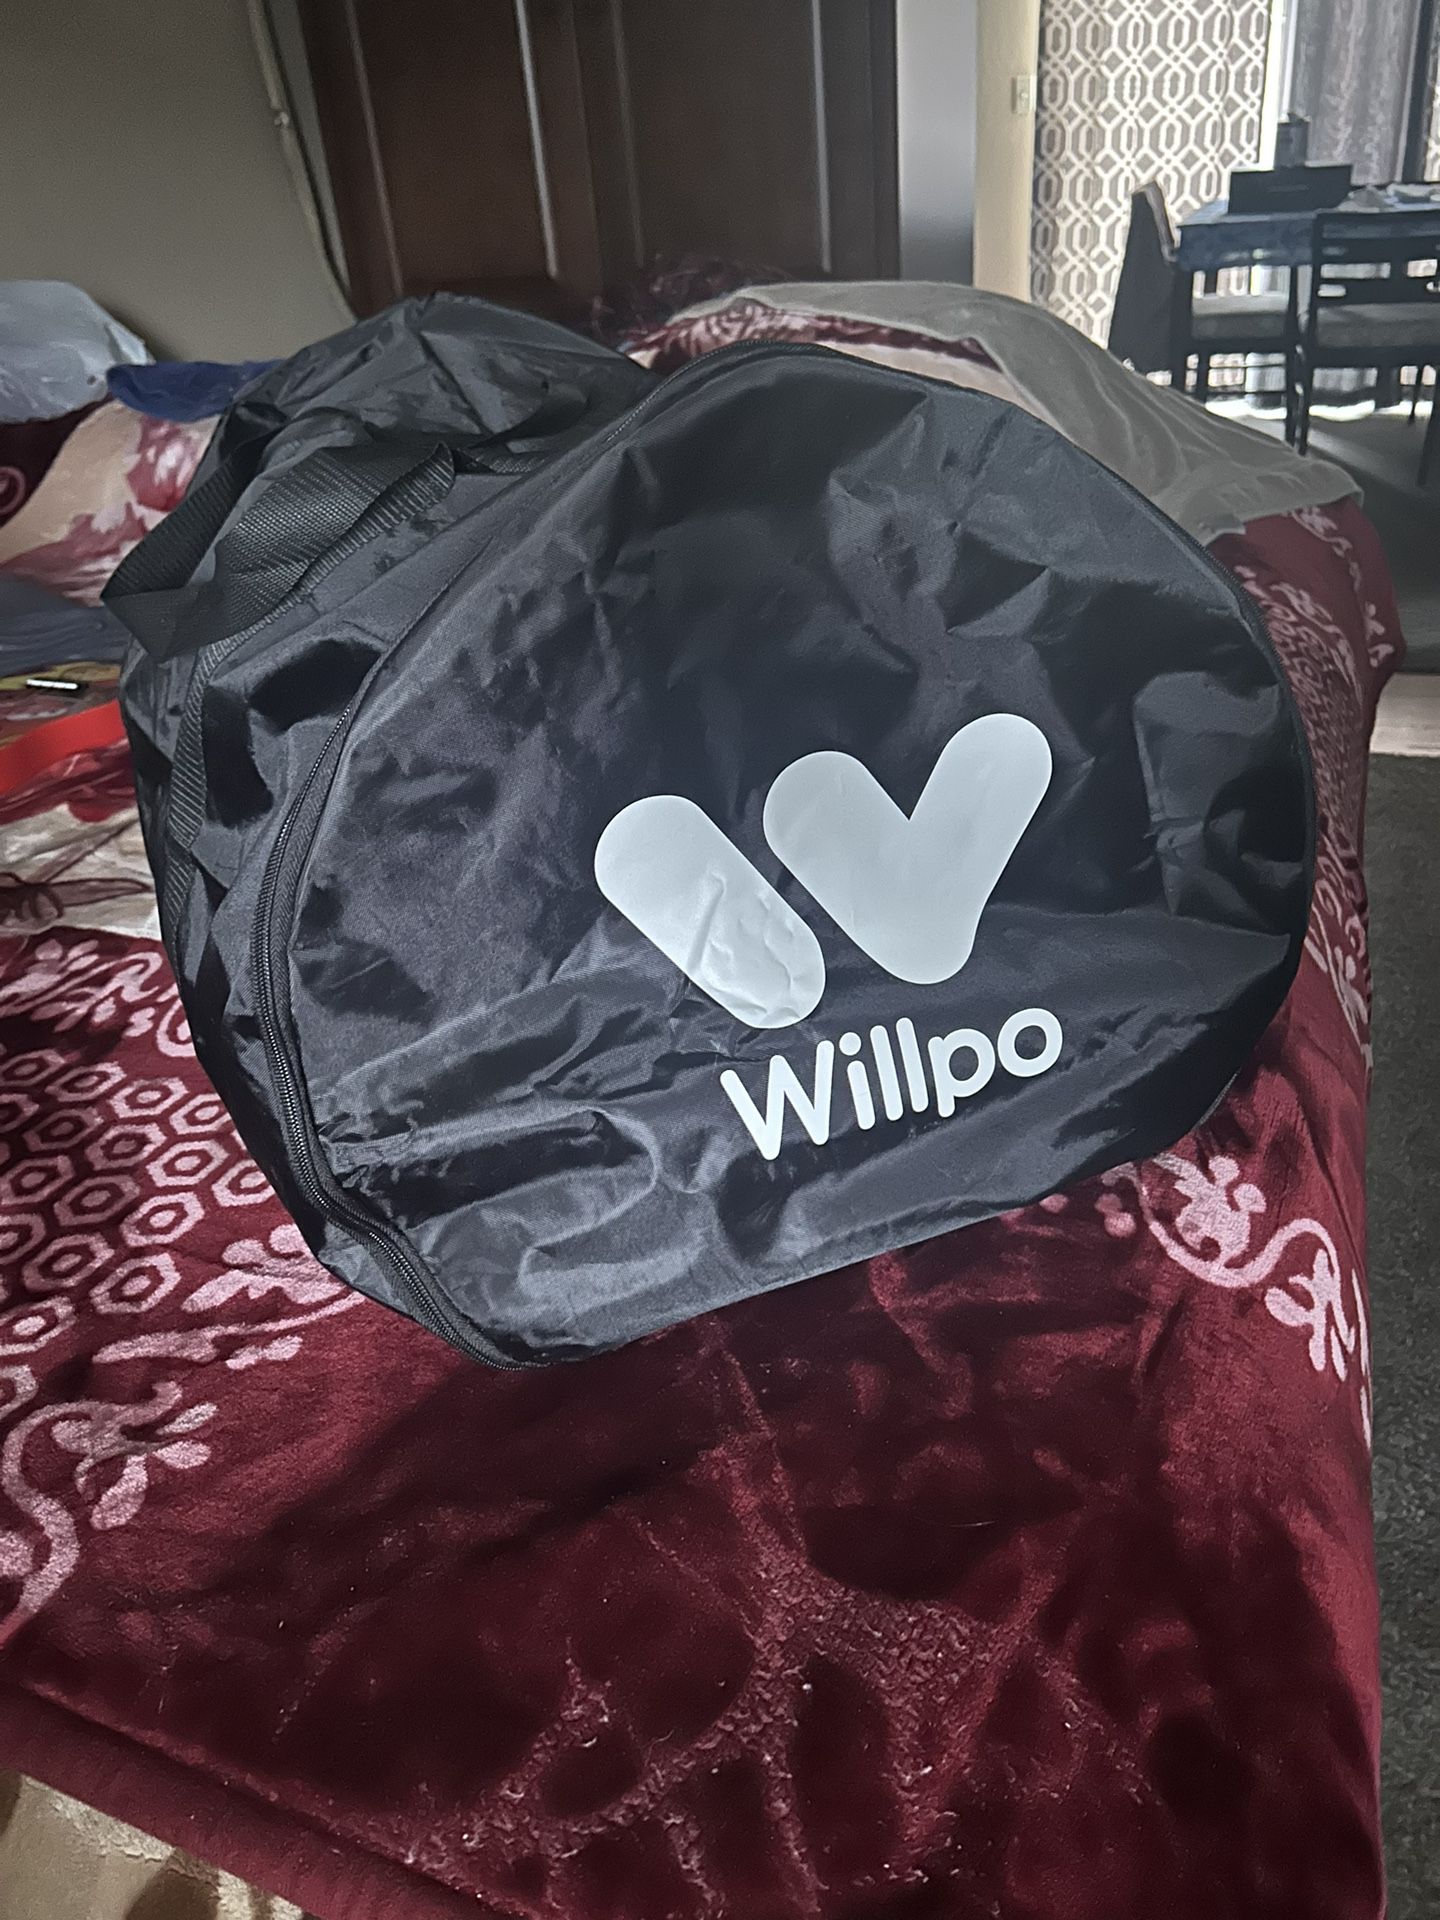 New WILlPO  Duffel Bag About 31”L